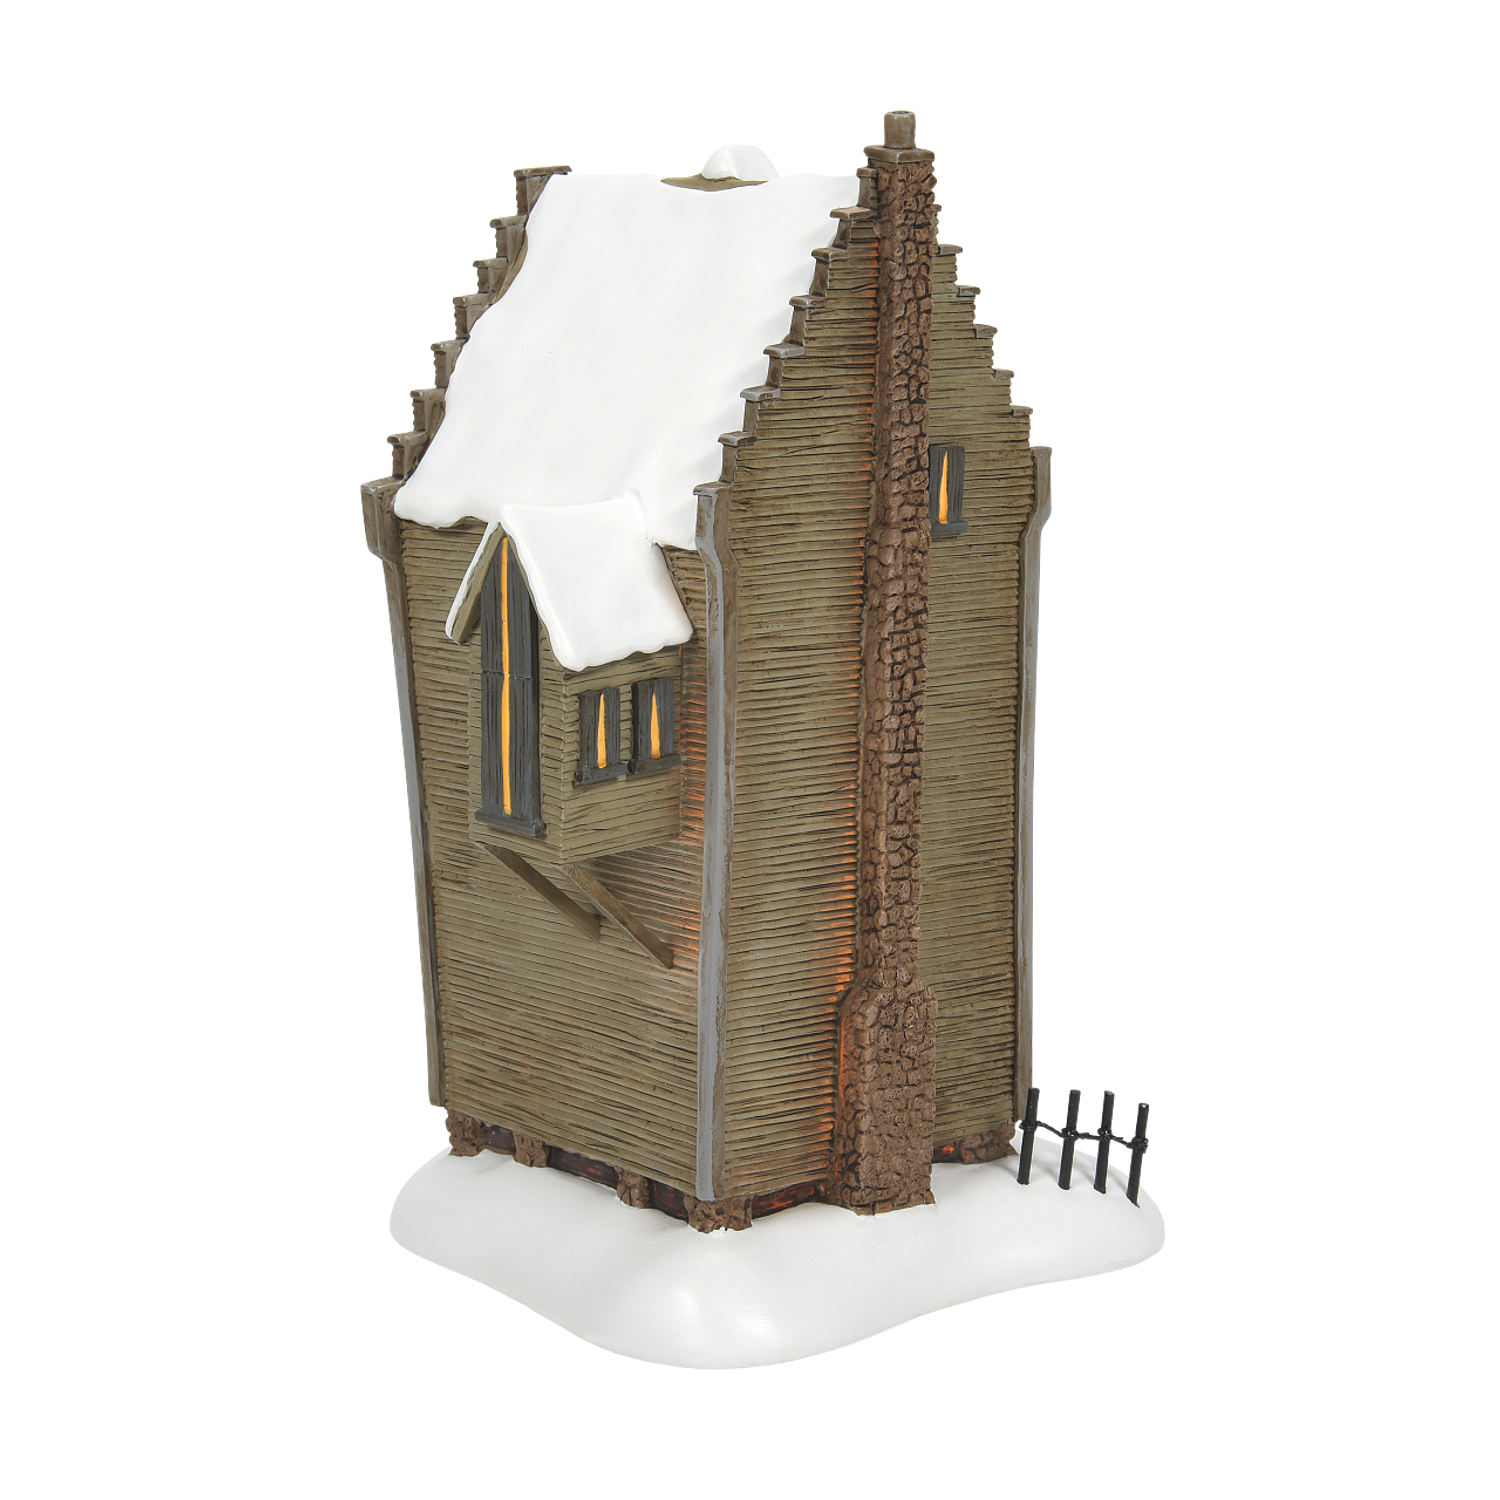 2019 Department 56 Harry Potter Village - The Jolly Christmas Shop